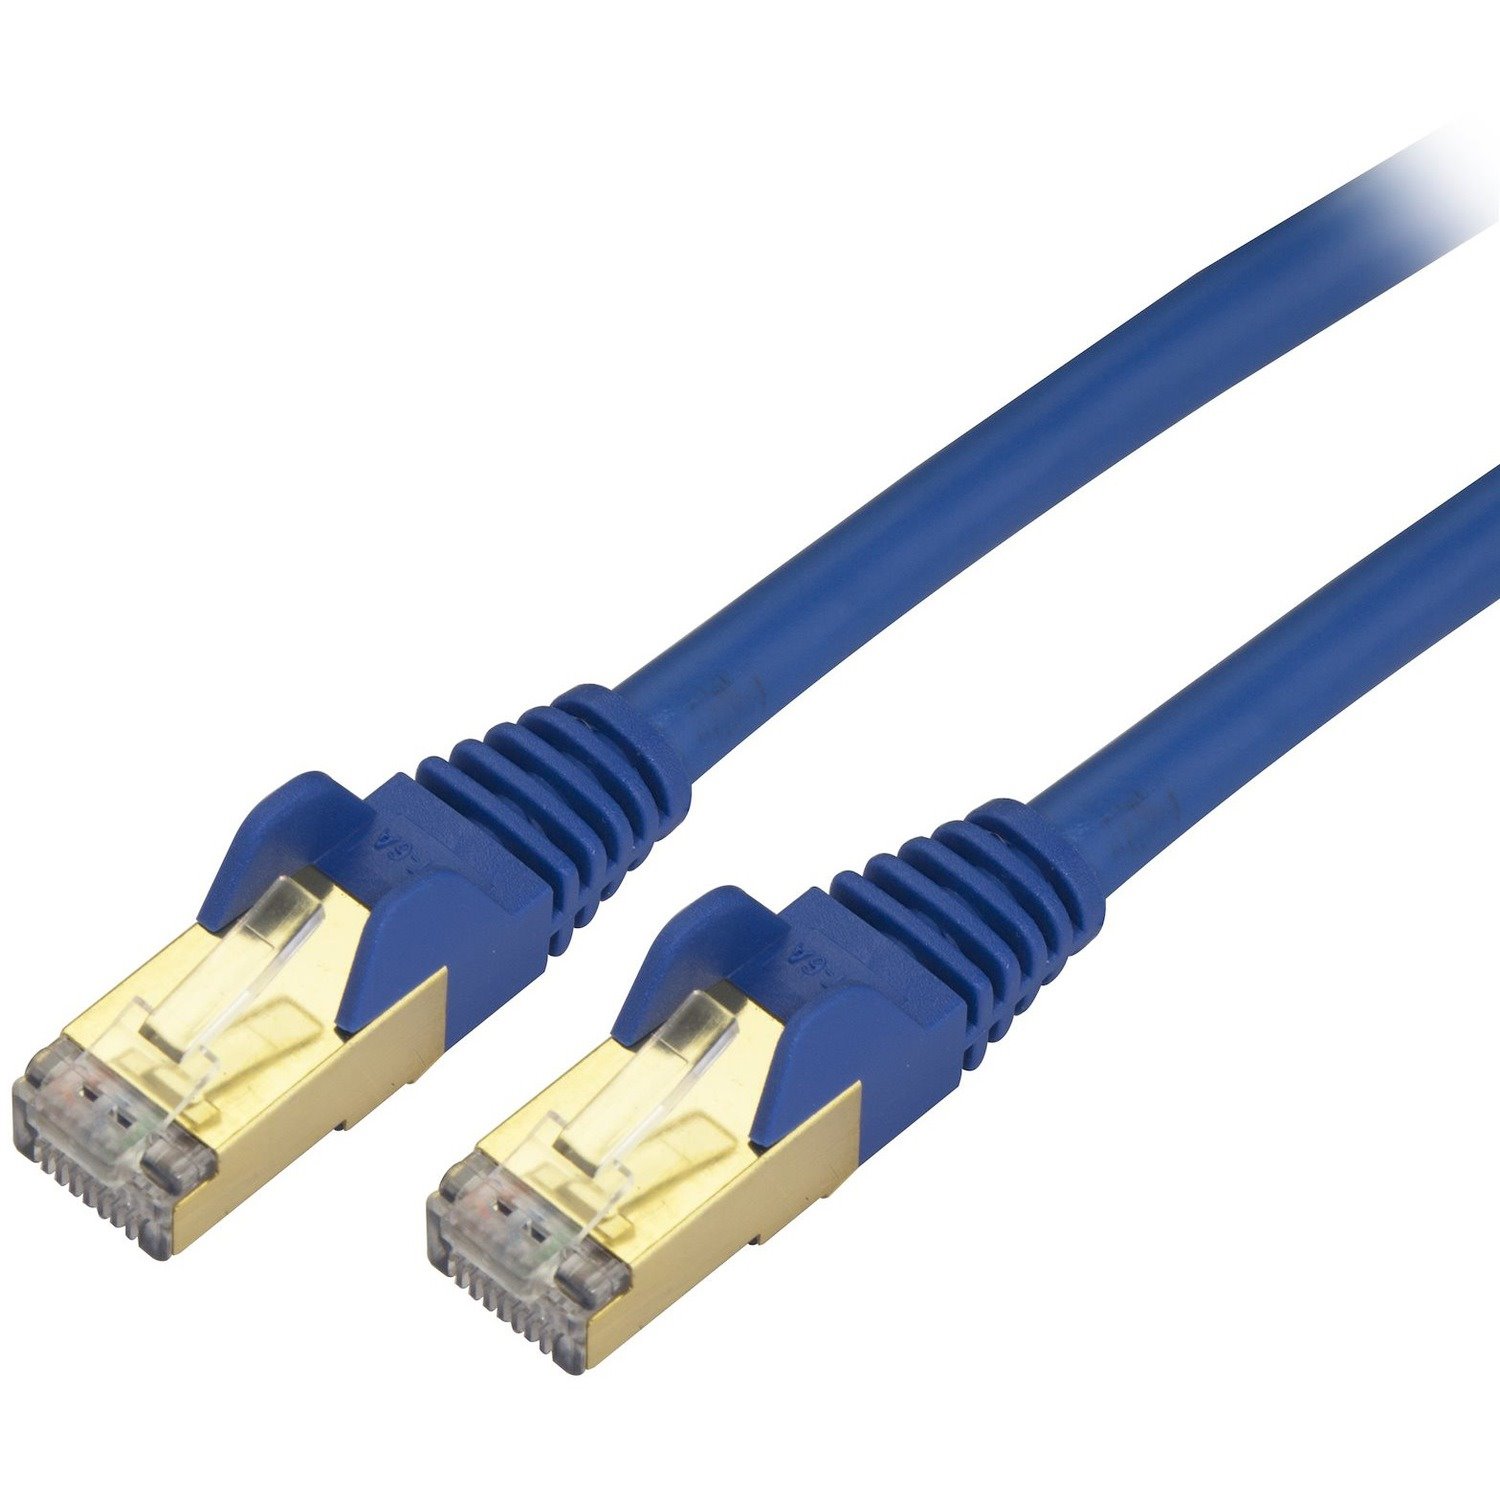 StarTech.com 15ft CAT6a Ethernet Cable - 10 Gigabit Category 6a Shielded Snagless 100W PoE Patch Cord - 10GbE Blue UL Certified Wiring/TIA